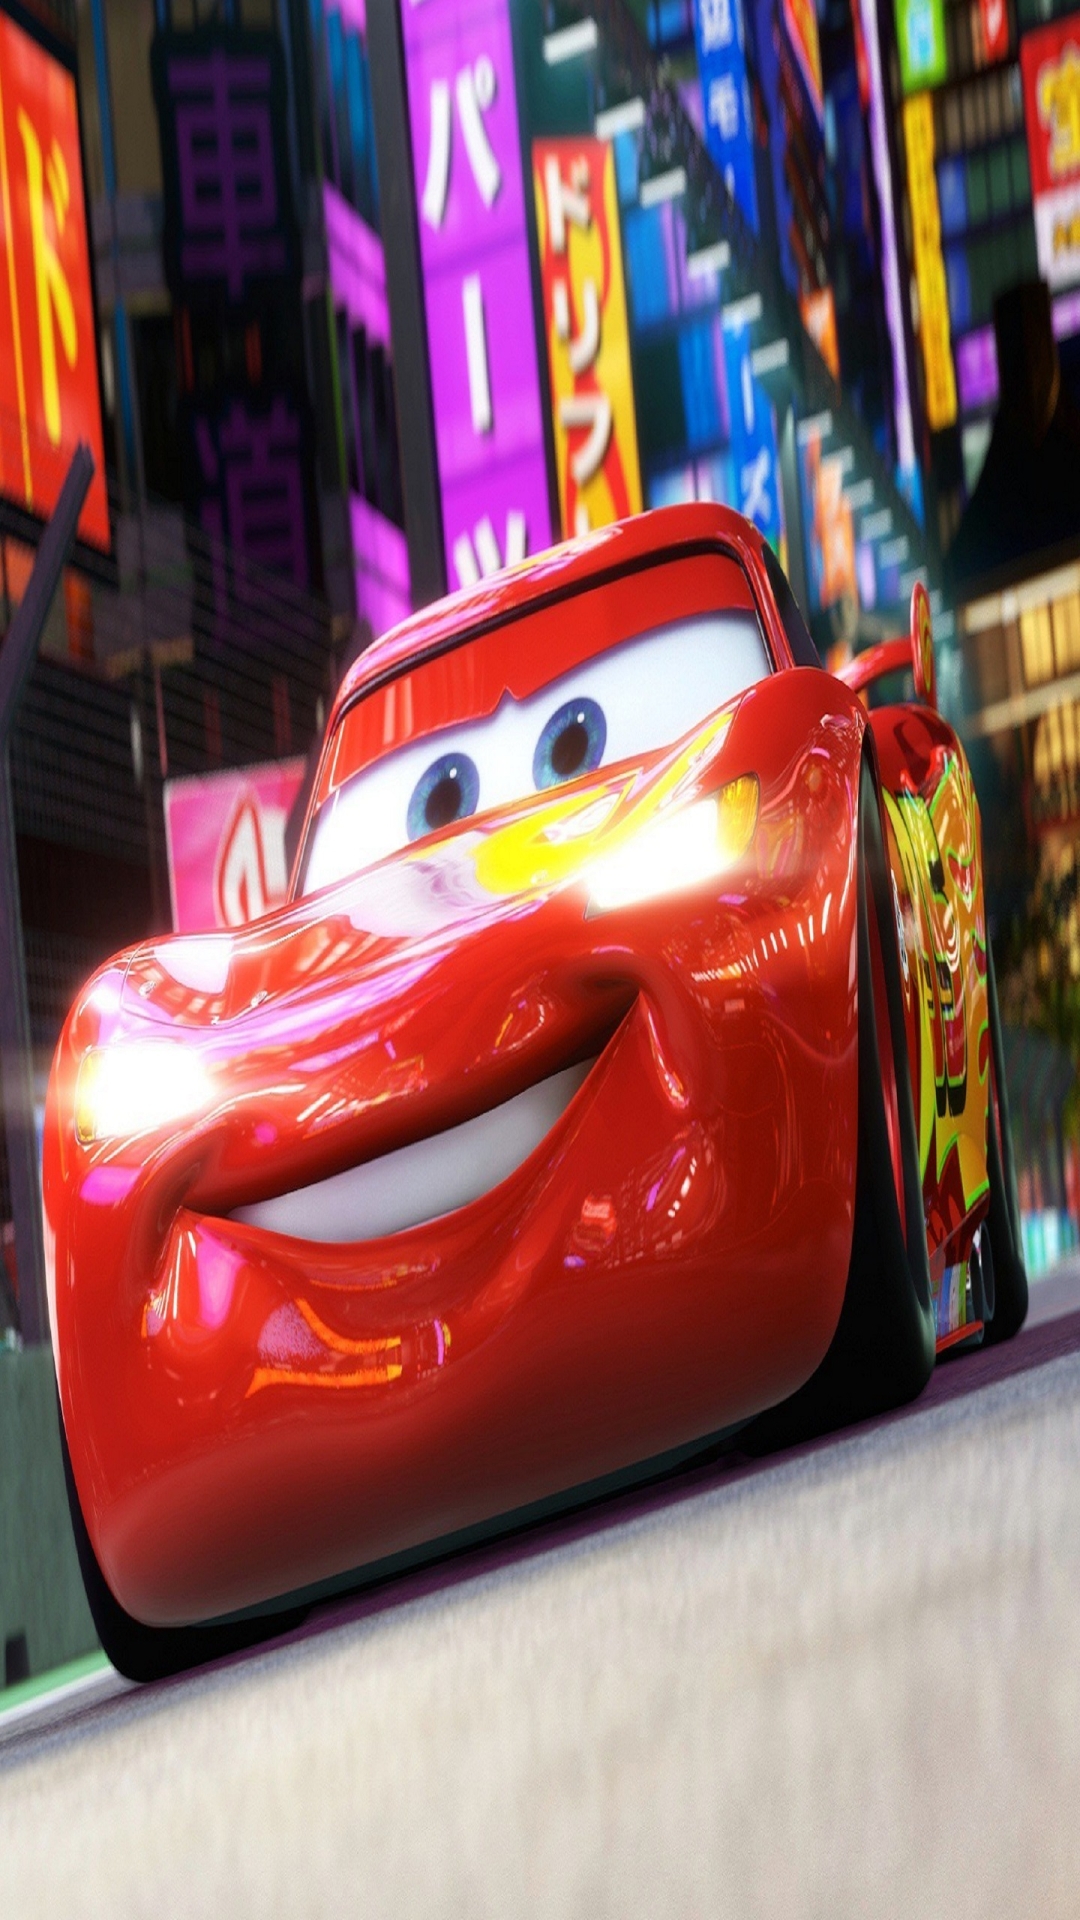 Cars 3 Movie for Samsung A9 Pro & A7 resolution